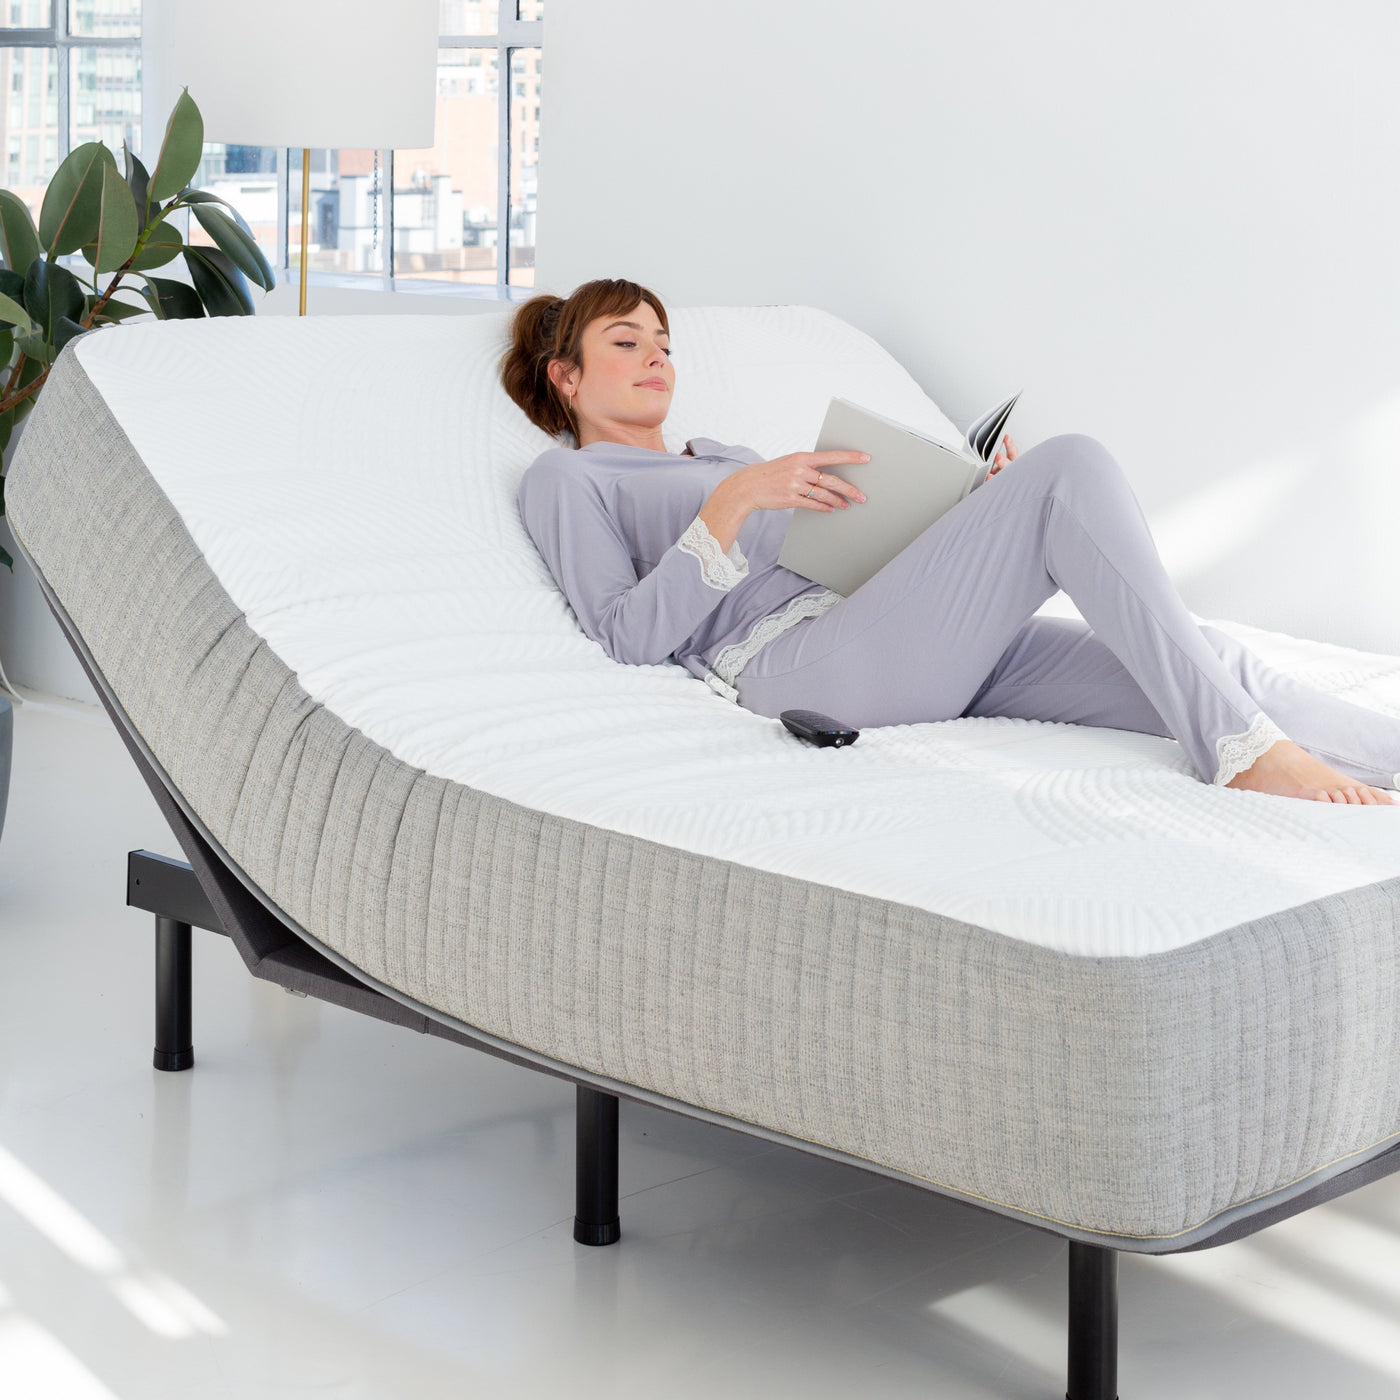 There Are Eight Benefits To Adjustable Beds